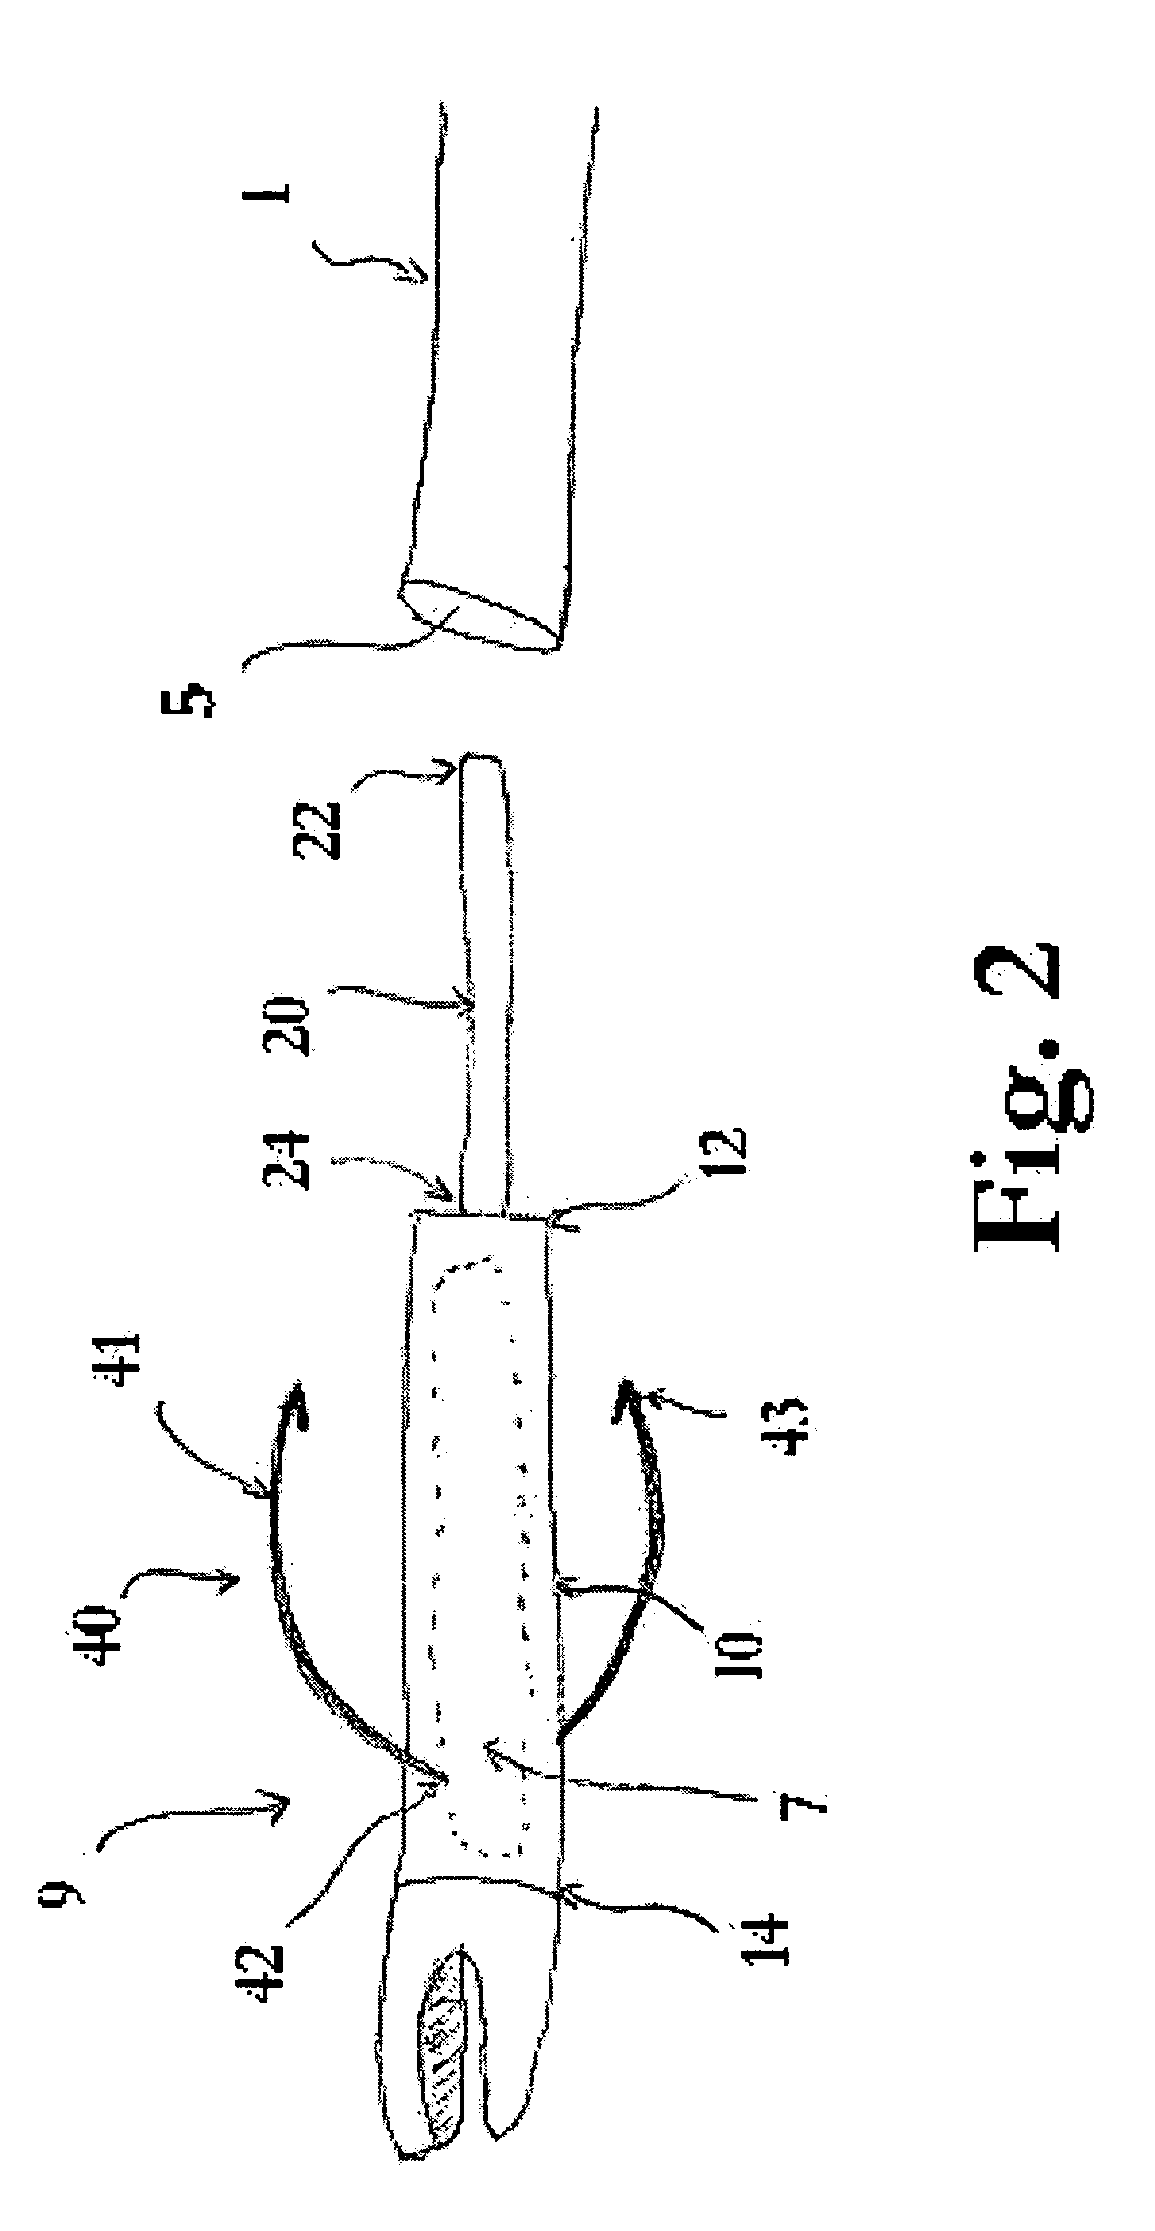 Device for detaching locator from arrow for tracking game